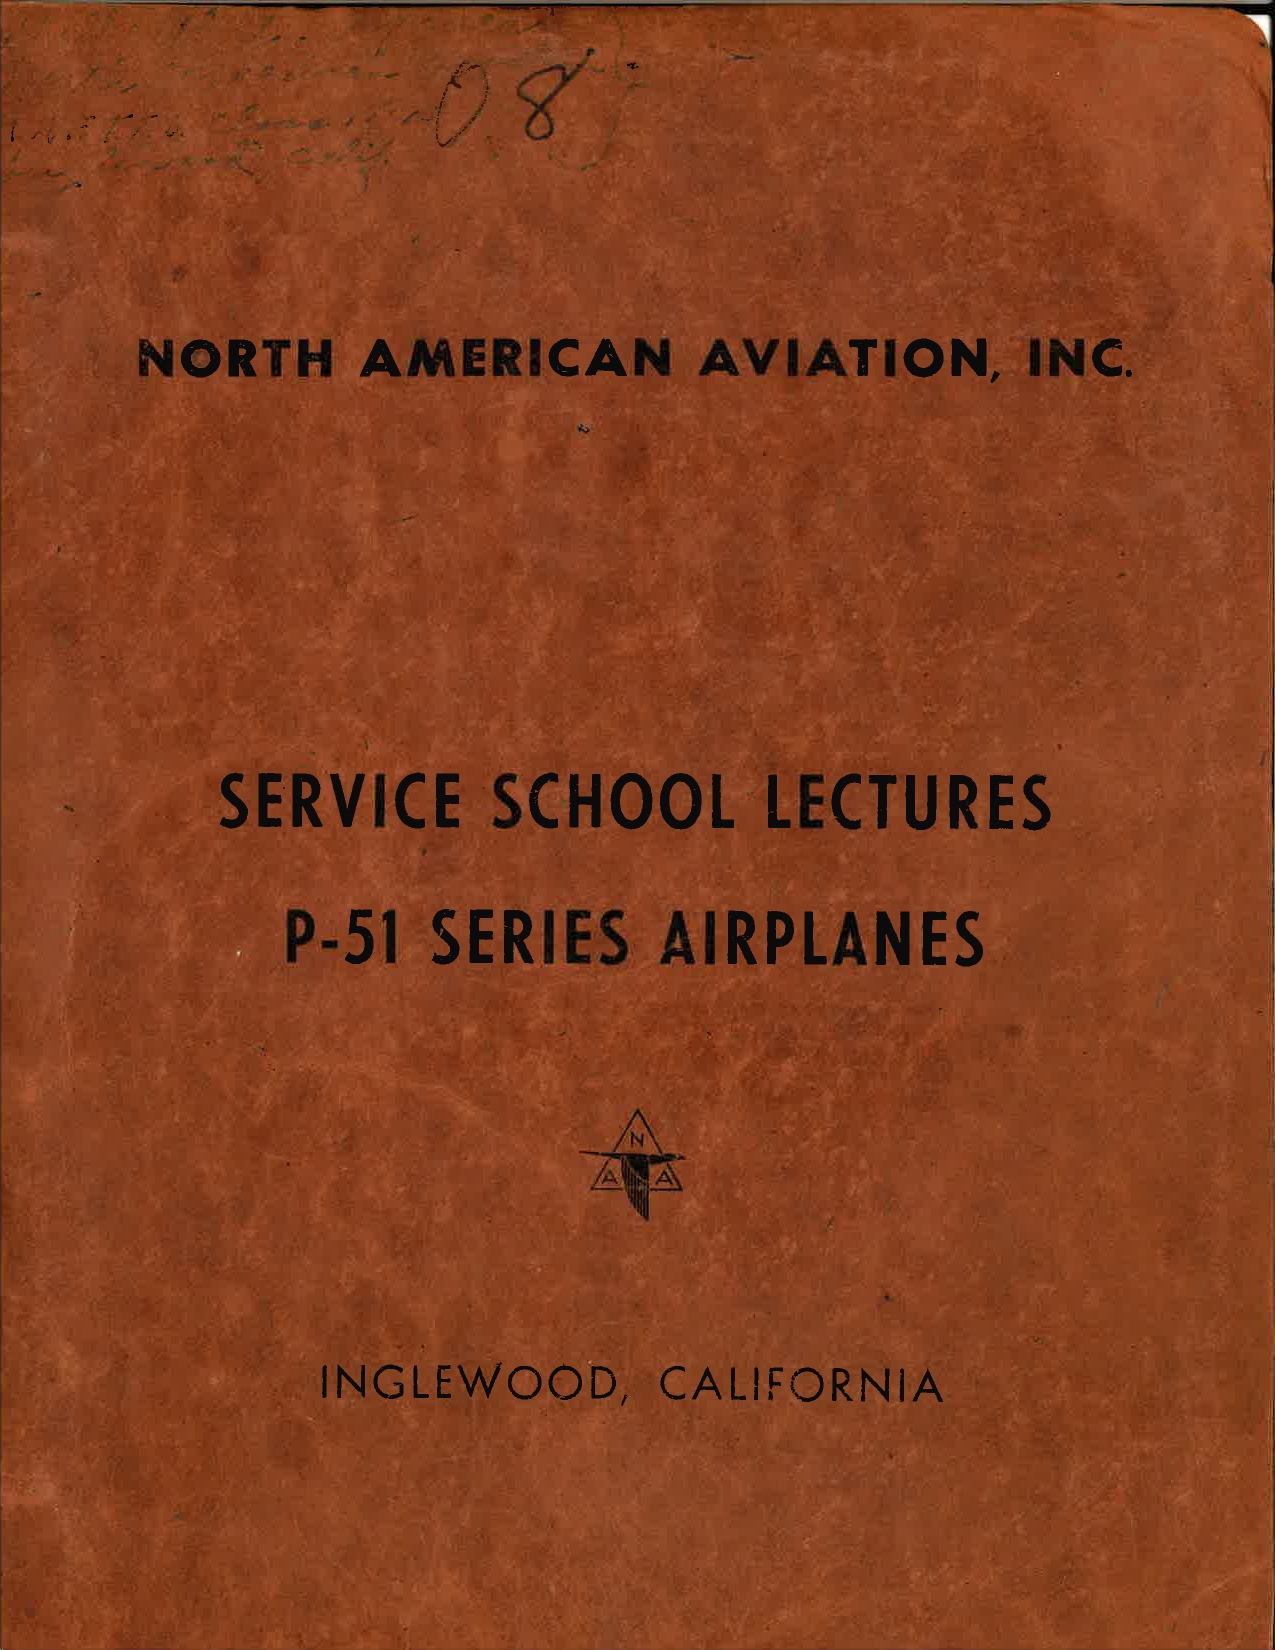 Sample page 1 from AirCorps Library document: Service School Lectures - P-51